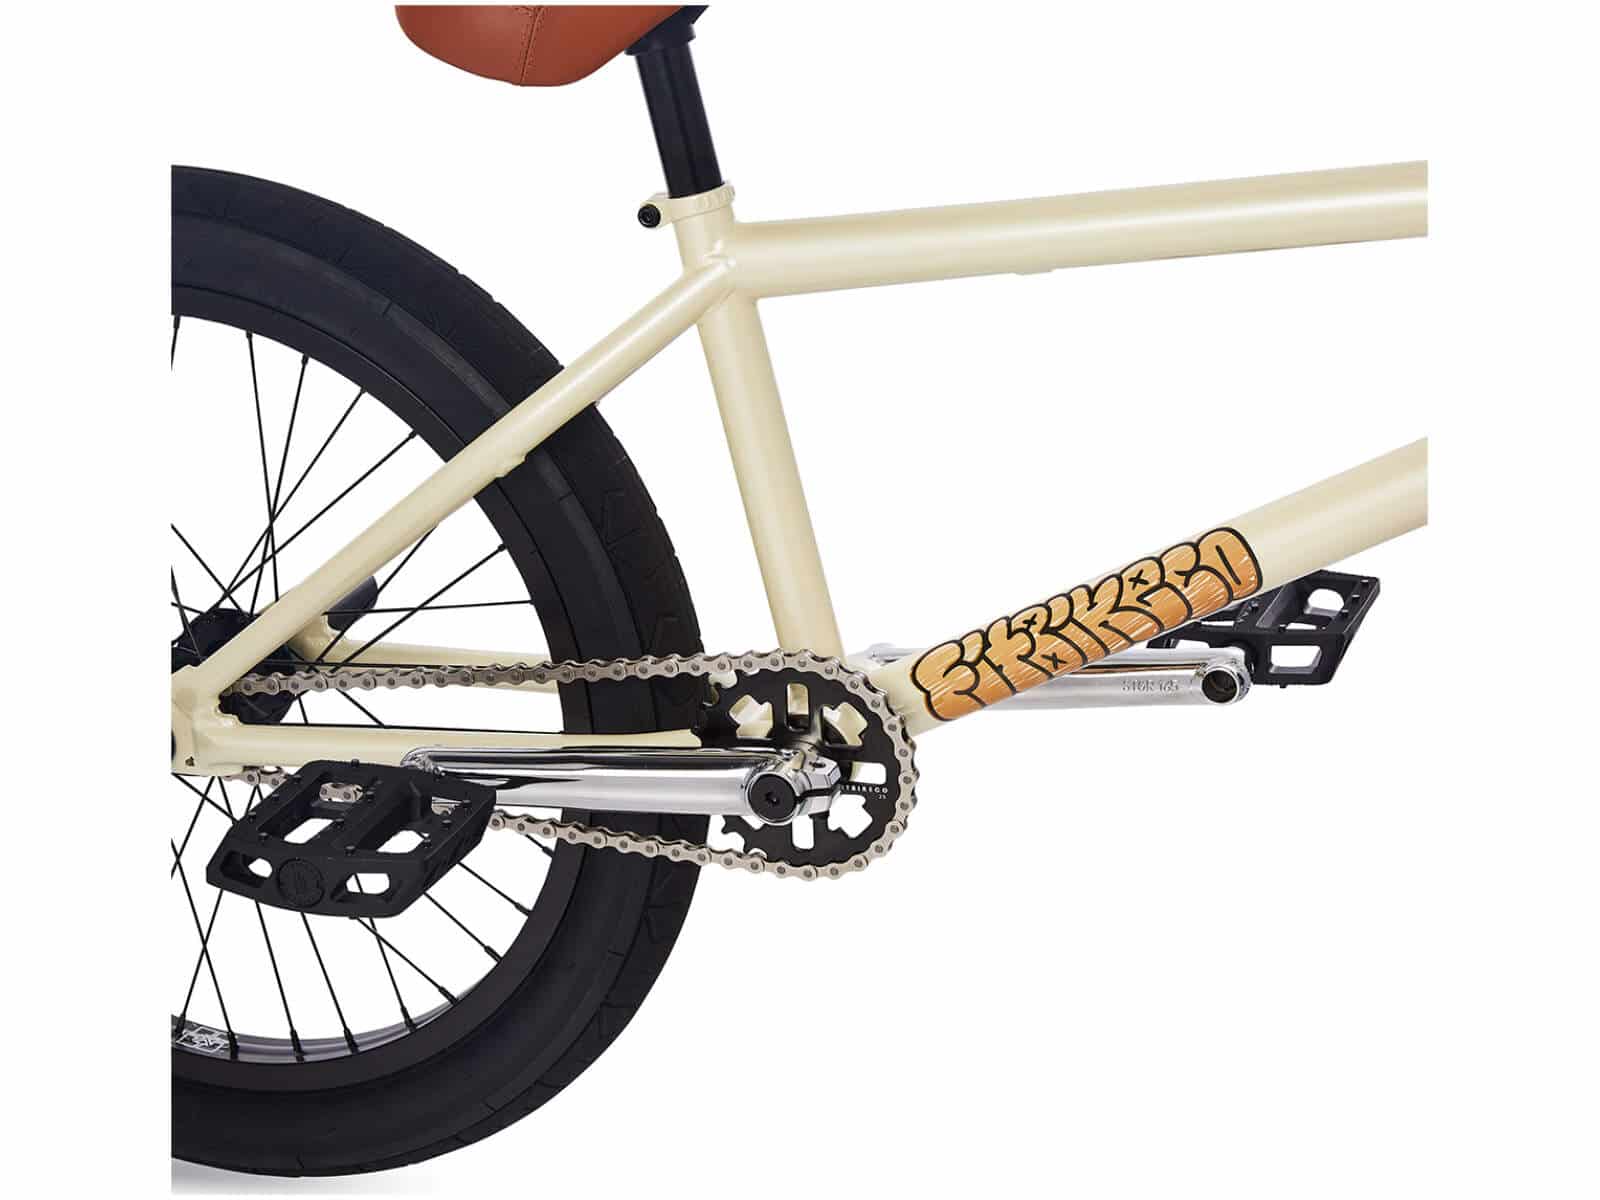 Fitbikeco TRL 20